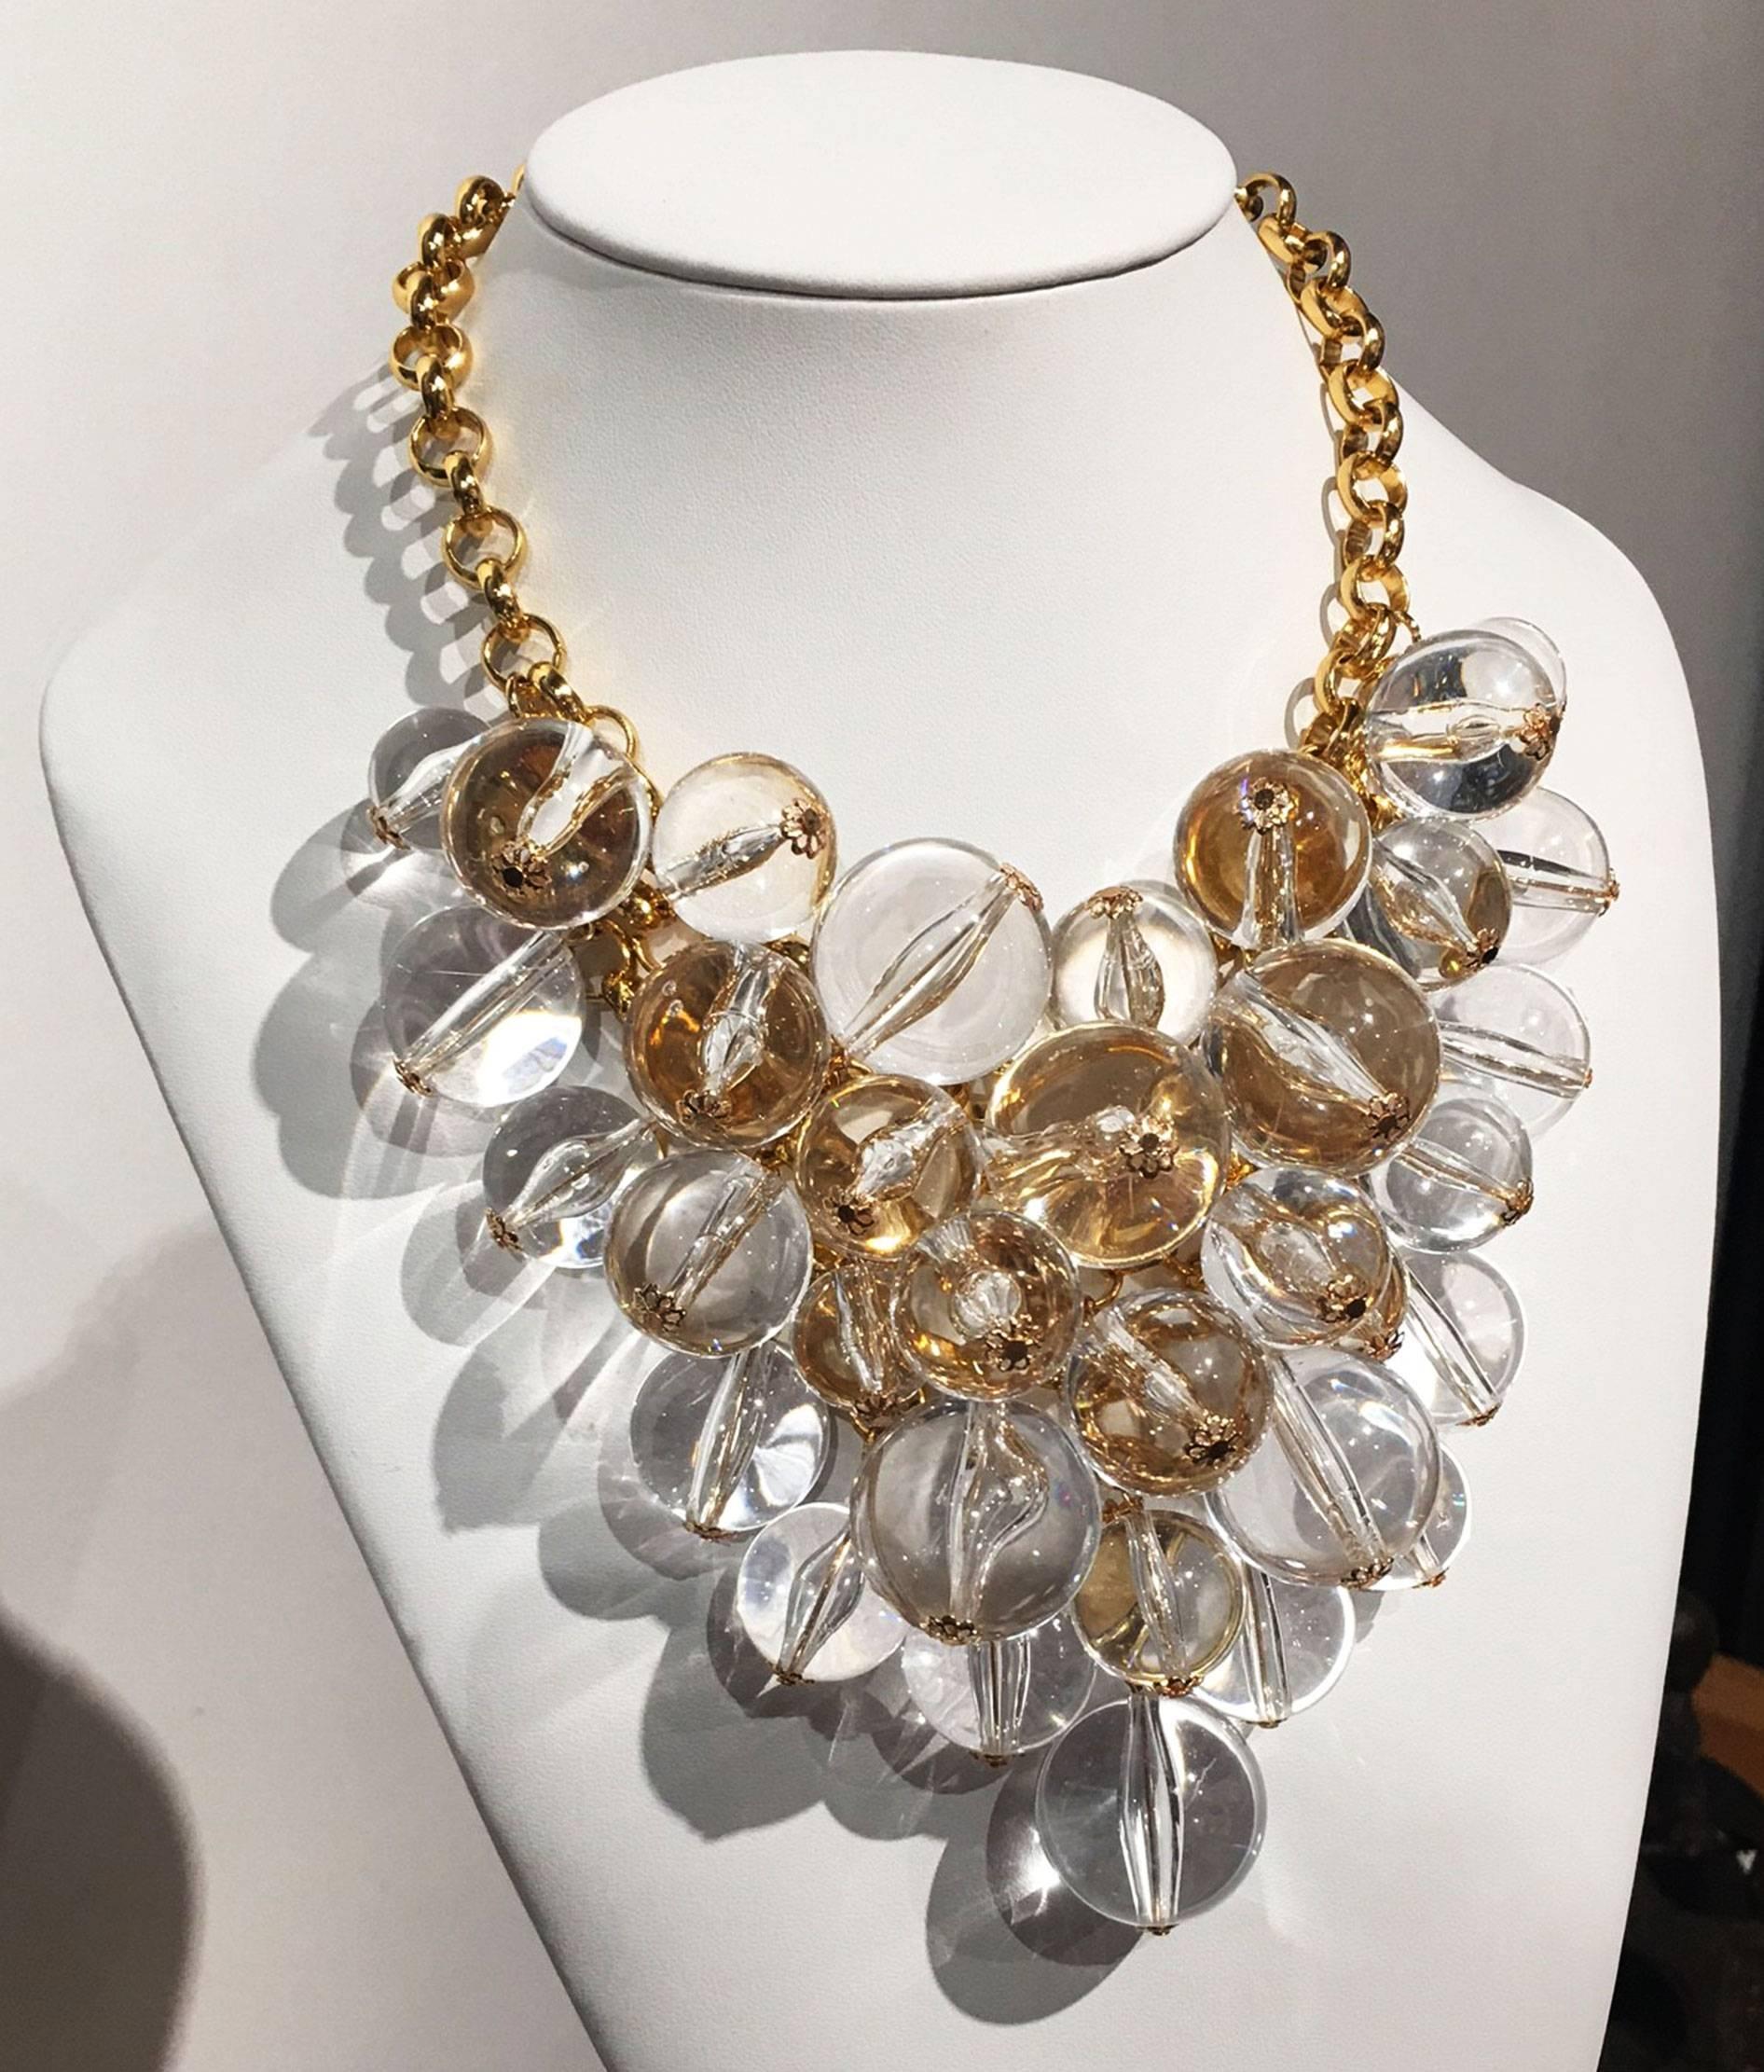 Sensational signed COURREGES PARIS Couture Festoon Lucite Pools Of Light Runway Necklace; Gold Tone; It has a round tag marked 